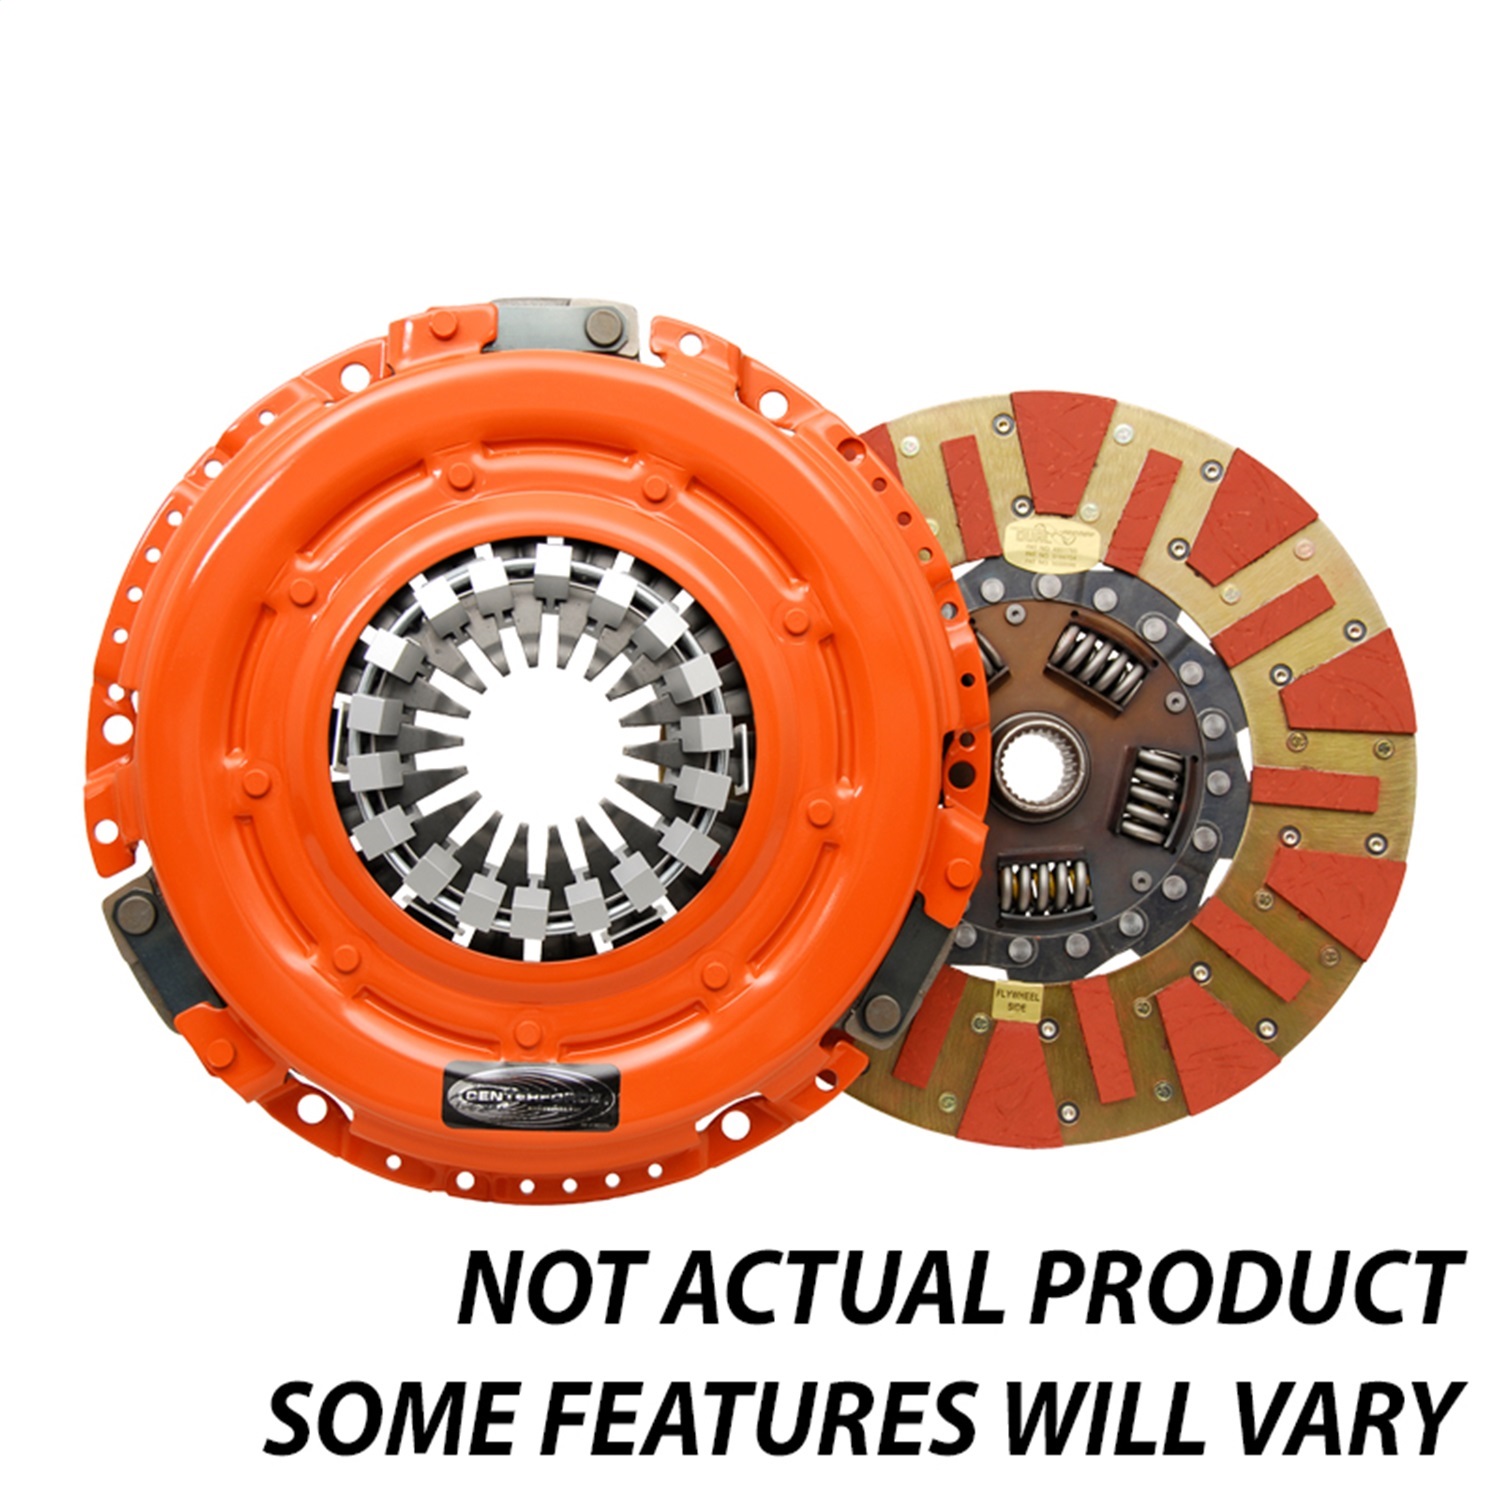 Centerforce Centerforce DF014040 Dual Friction Clutch Pressure Plate And Disc Set